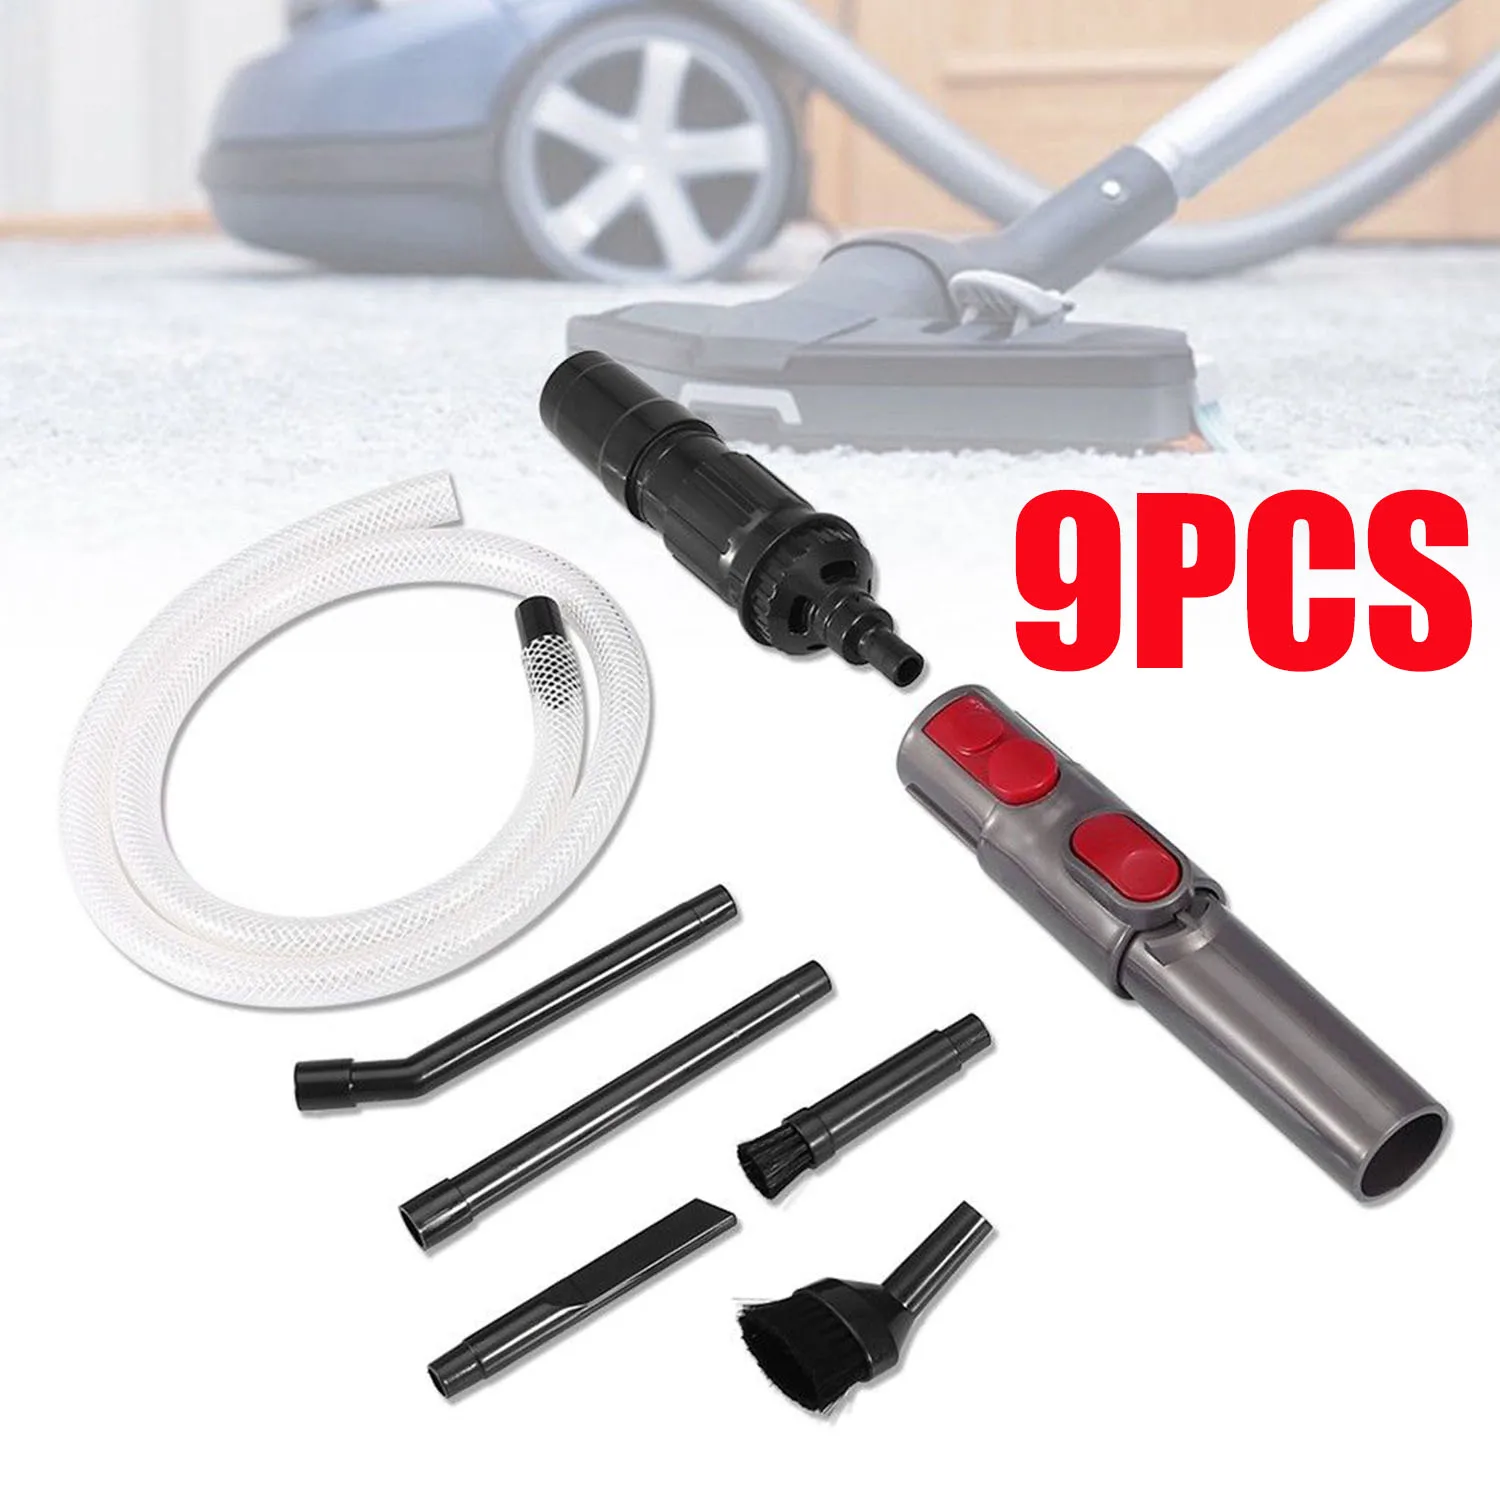 

9x Car Vehicle Attachment Cleaning Tools Replacement Kit For Dyson V7 V8 V10 Vacuum Cleaner multi-functional micro-cleaning